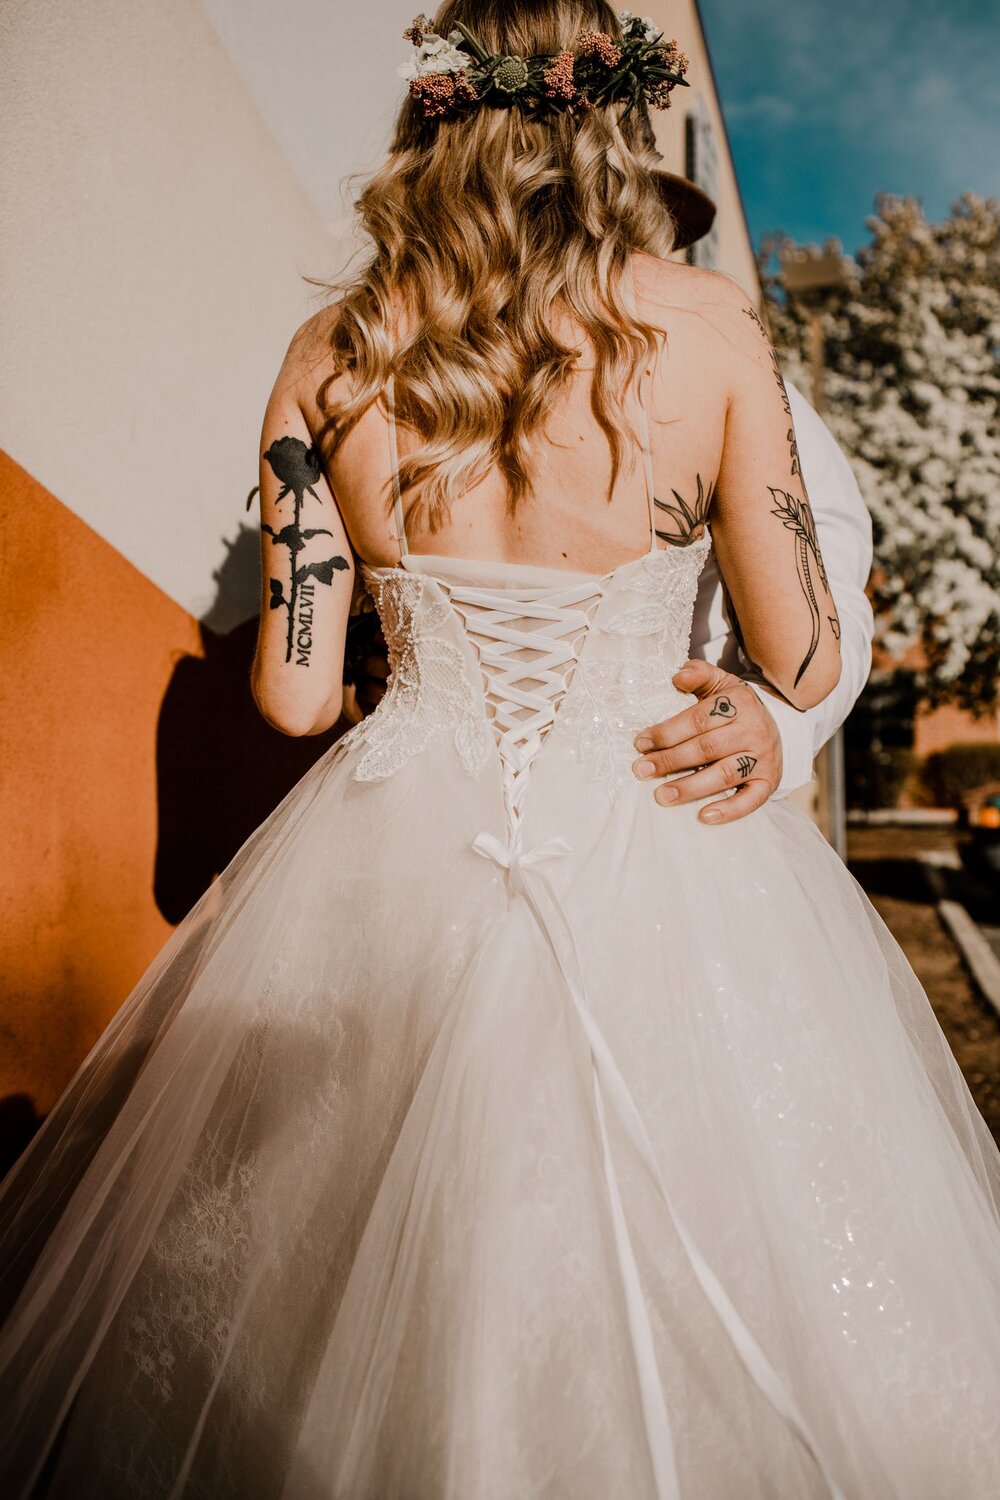 Woman from behind in a white wedding dress